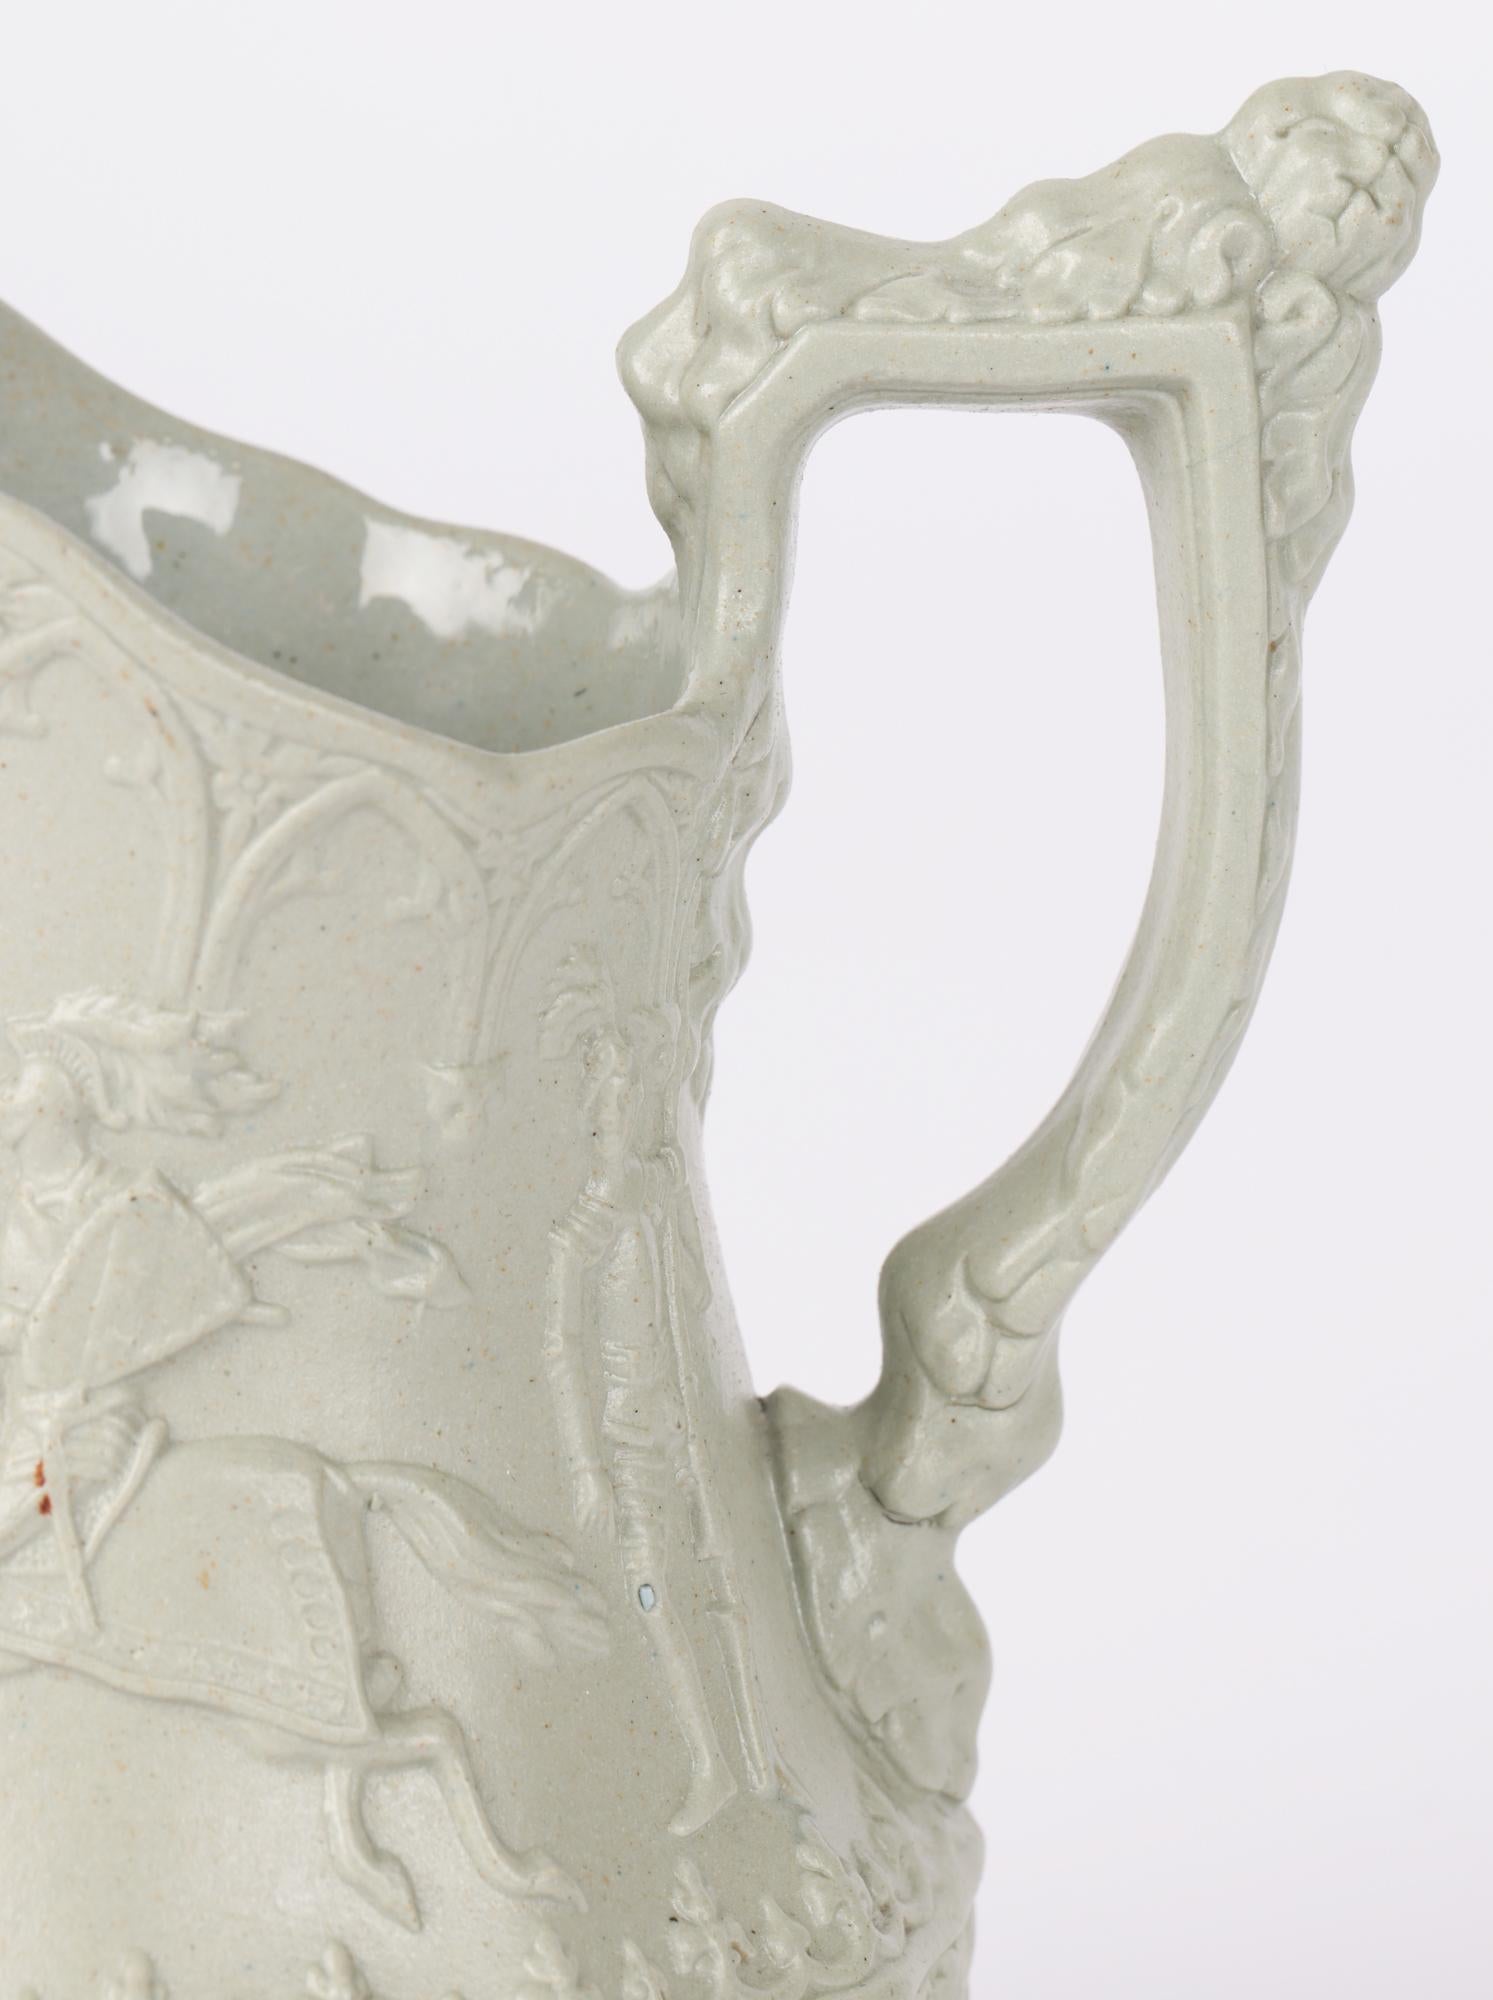 A scarce and exceptional antique English ceramic jug decorated in the Jousting Knights pattern by William Ridgway and dating from around 1840. The jug of miniature size is made in a green/grey drabware stoneware and is crisply molded with two